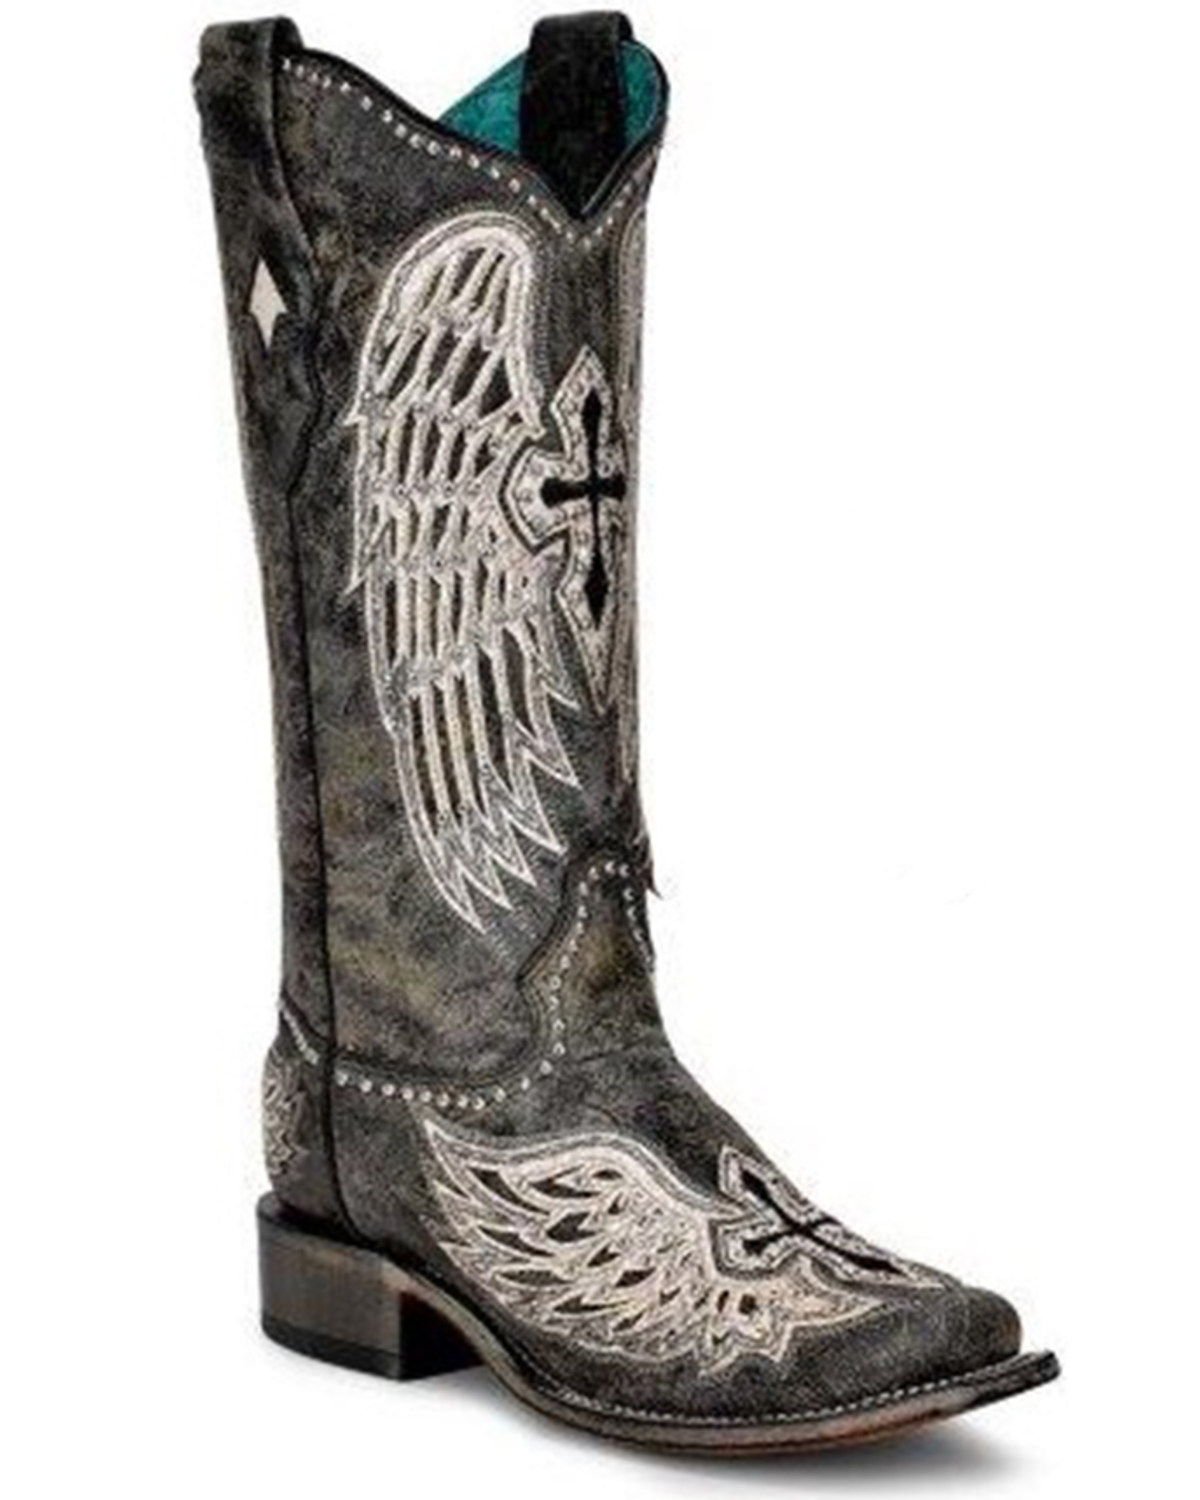 Corral Women's Cross & Wings Tall Western Boots - Square Toe